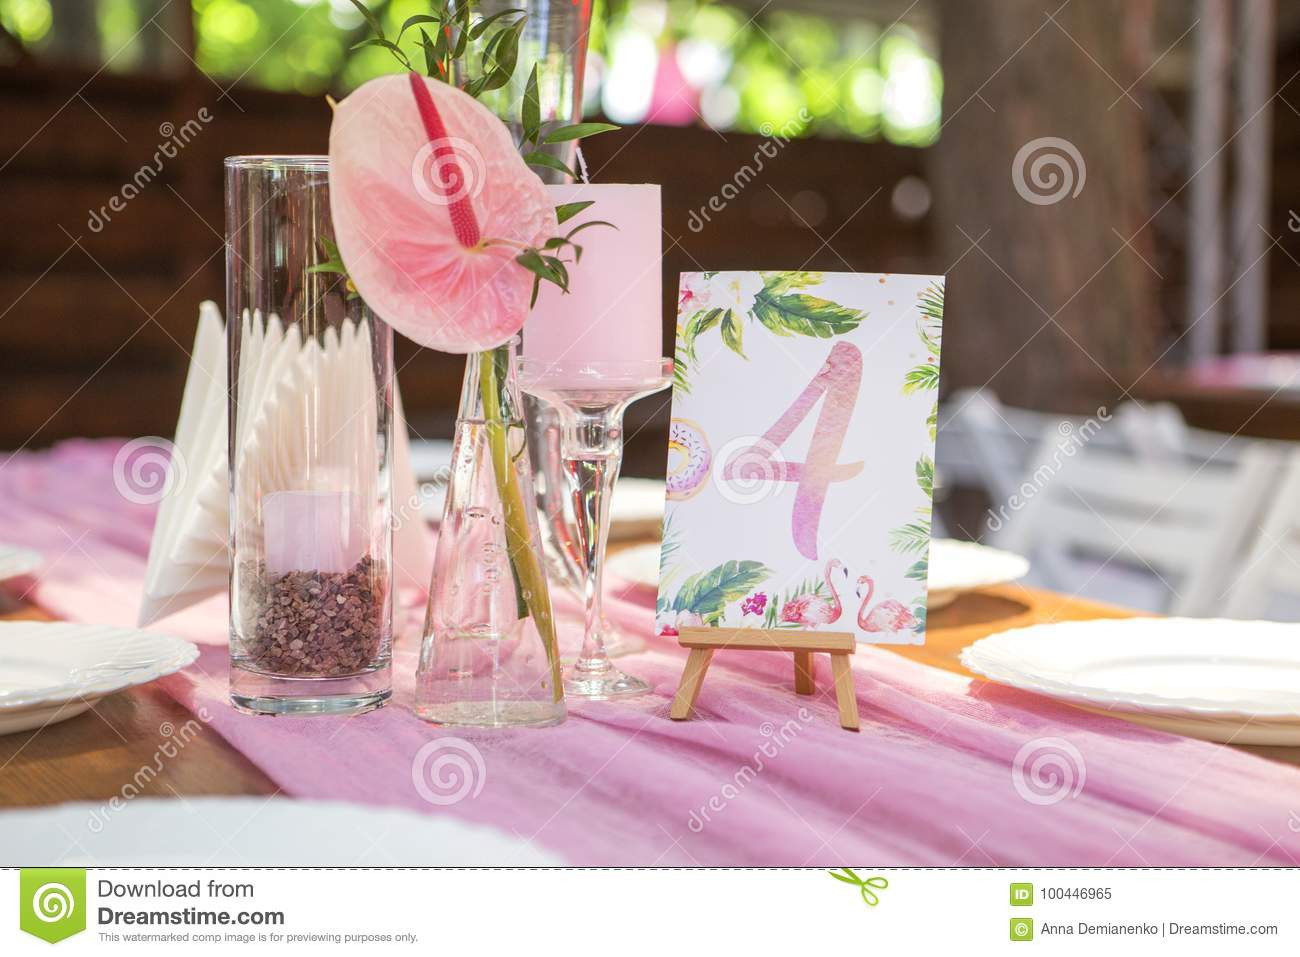 30 Best Cheap Unity Sand Vases 2024 free download cheap unity sand vases of decoration for a wedding ceremony on a back yard with tables pl inside decoration for a wedding ceremony on a back yard with tables plates and vases full of anthuri